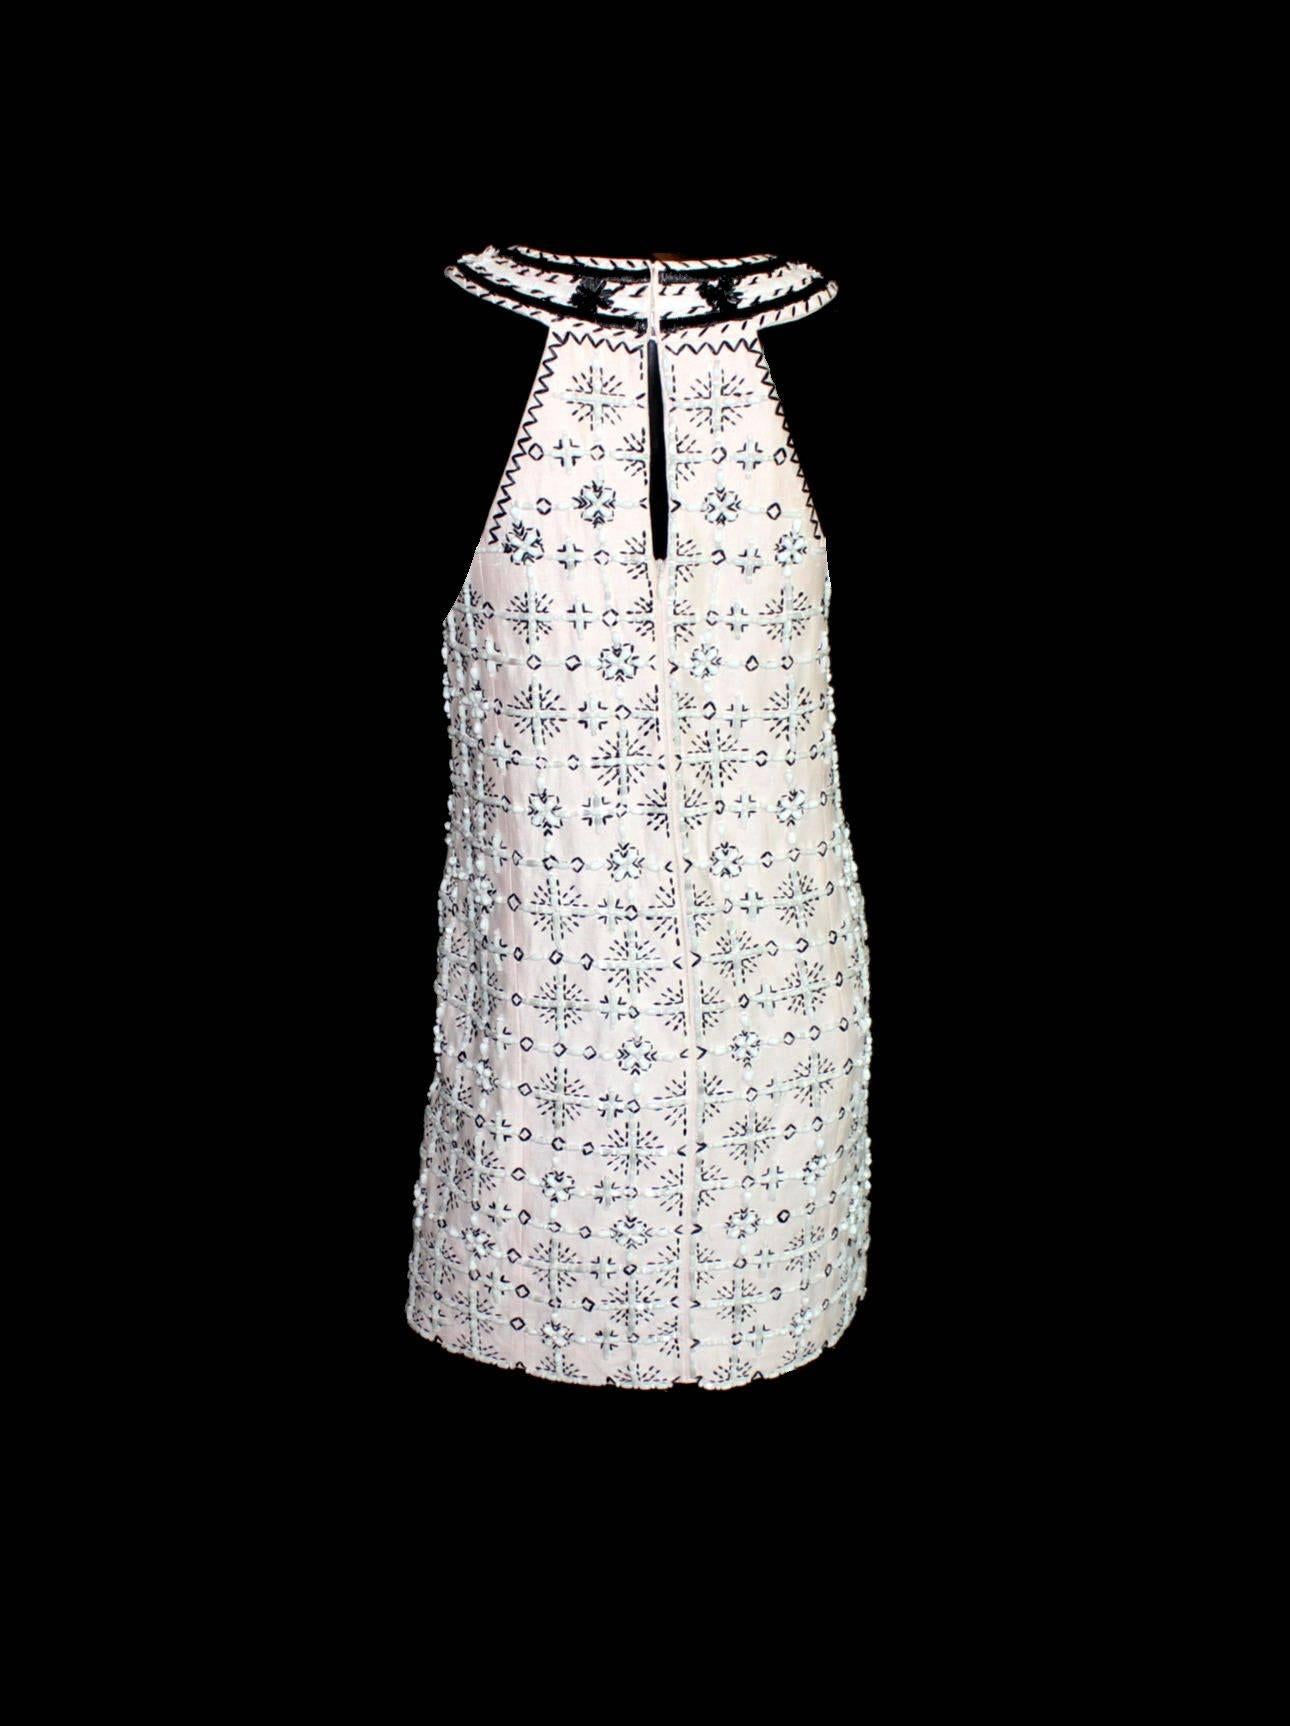 Stunning cocktail dress by Emilio Pucci
Blush linen silk fabric with black and white trimming
Full beading
Beautiful embroidery and flower trimming
Fully lined
Closes with zip in back
Made in Italy
Size 40
New, unworn

Please refer to the celebrity